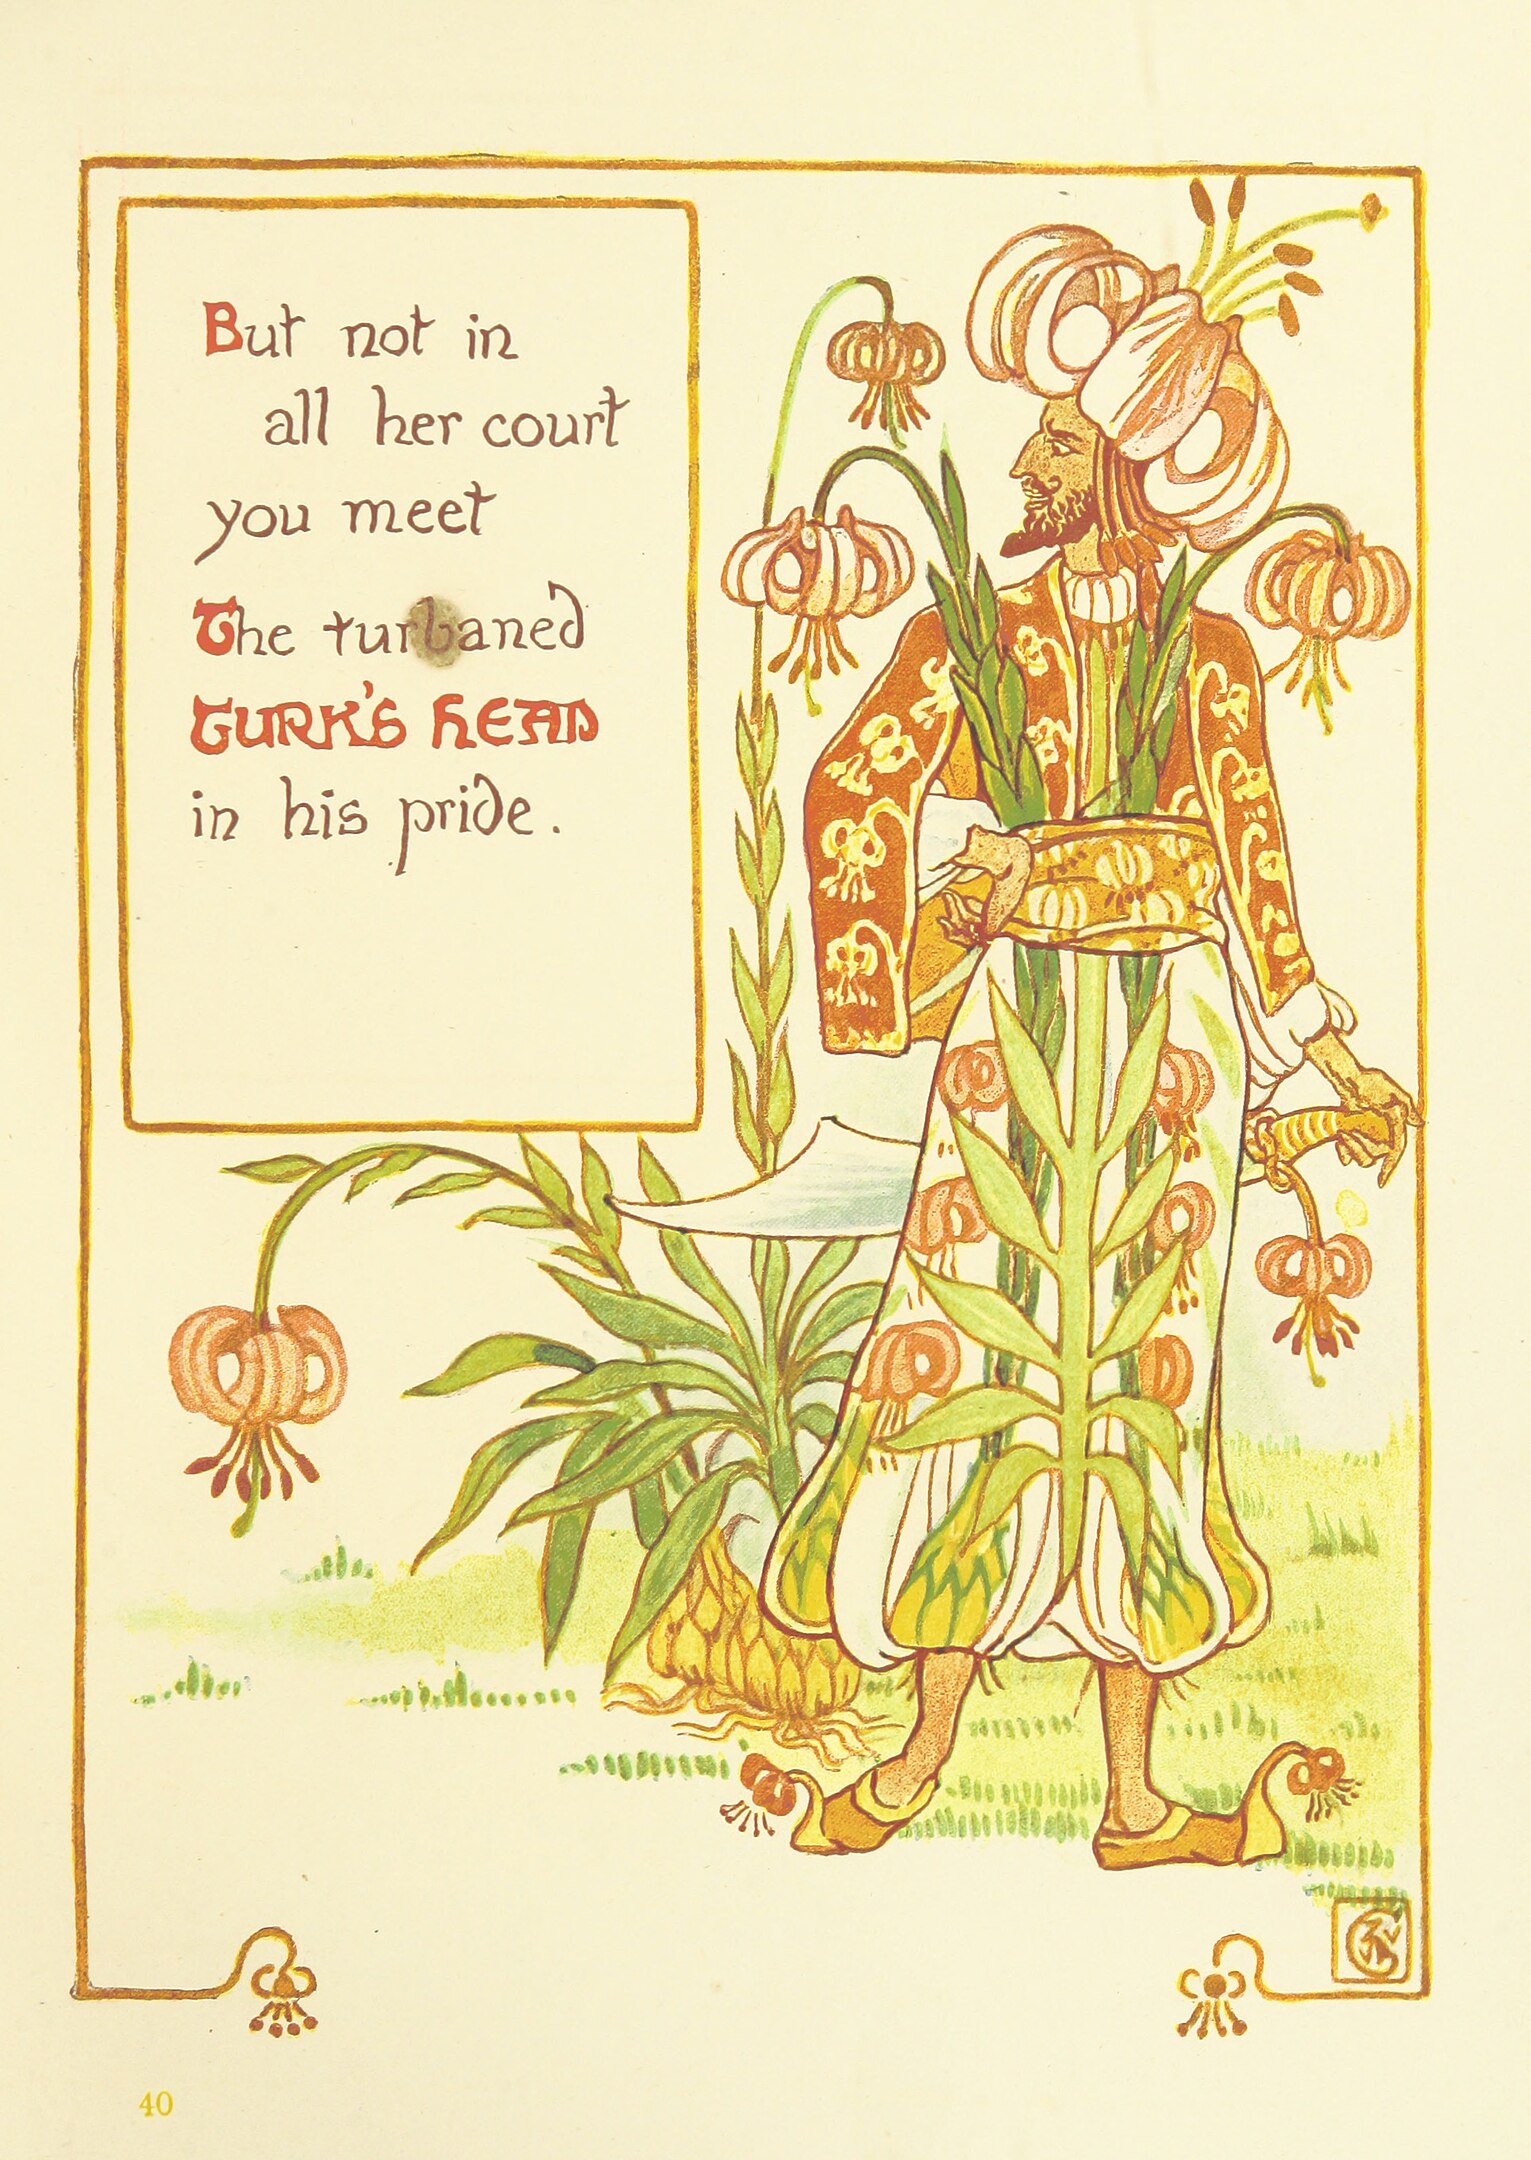 An illustration of a man dressed like a flower standing on grass